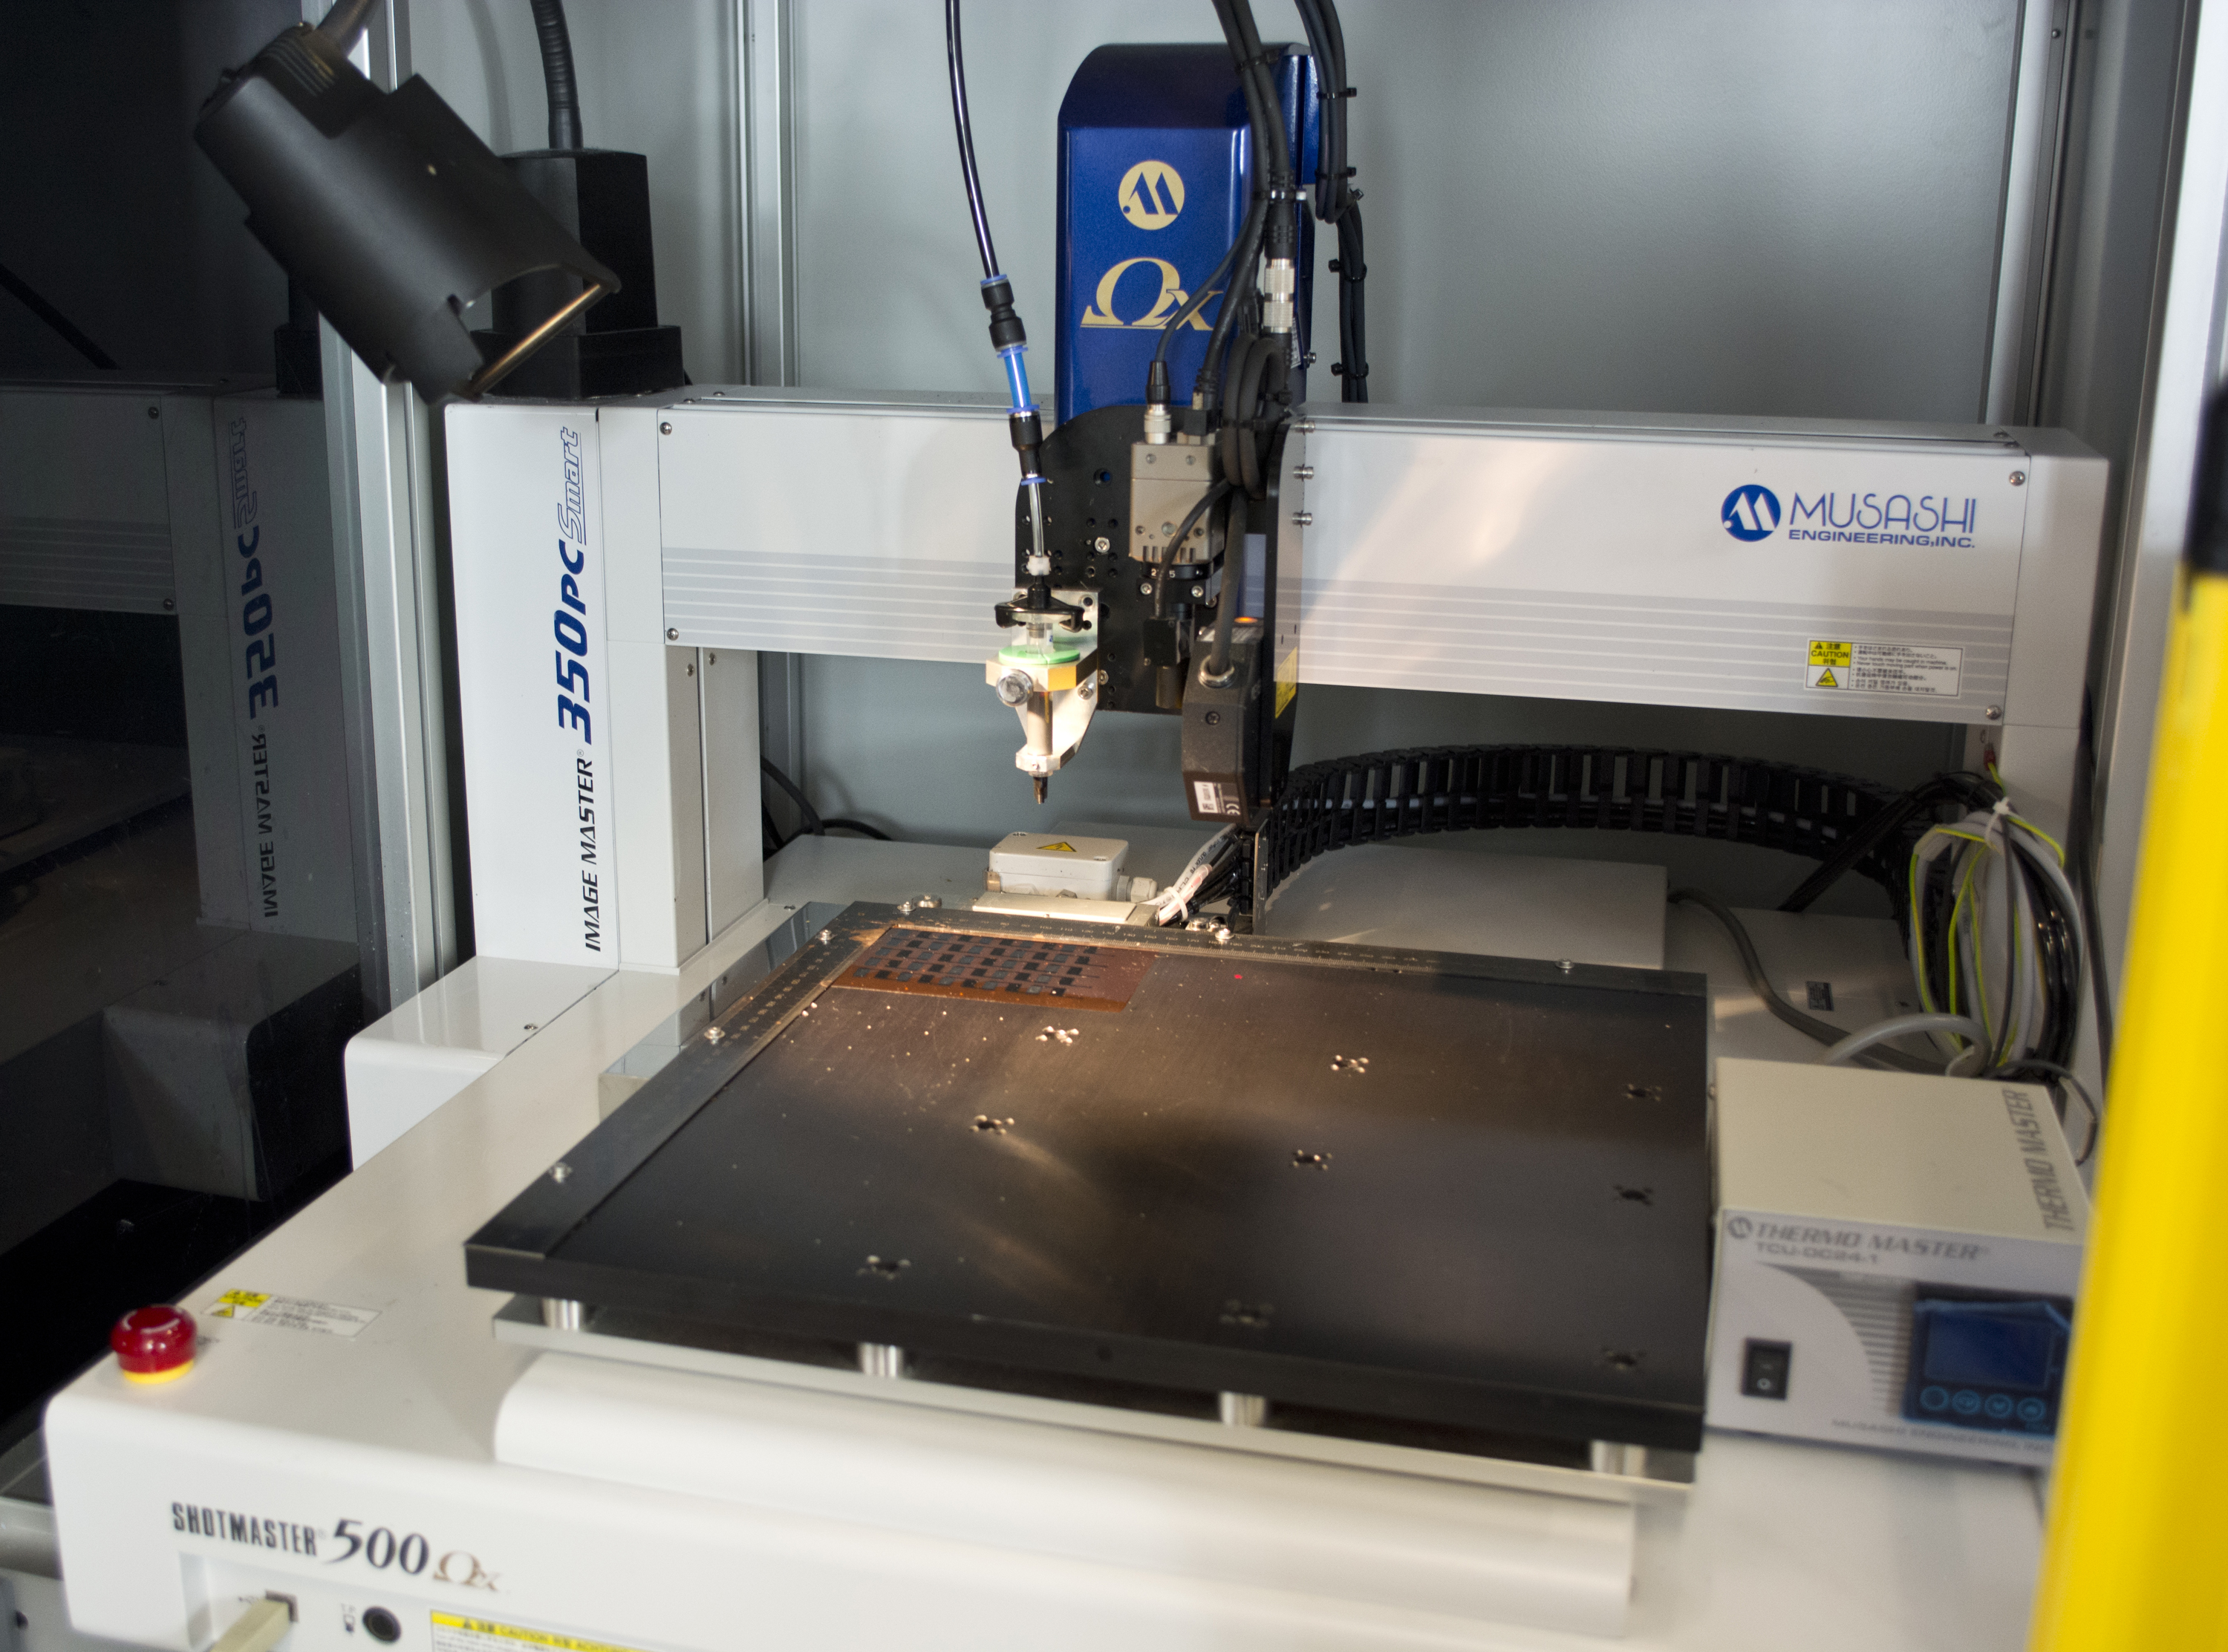 A dispensing printer coats films with the conductive and liquid polymer “Poly(Kx[Ni-itto])”.